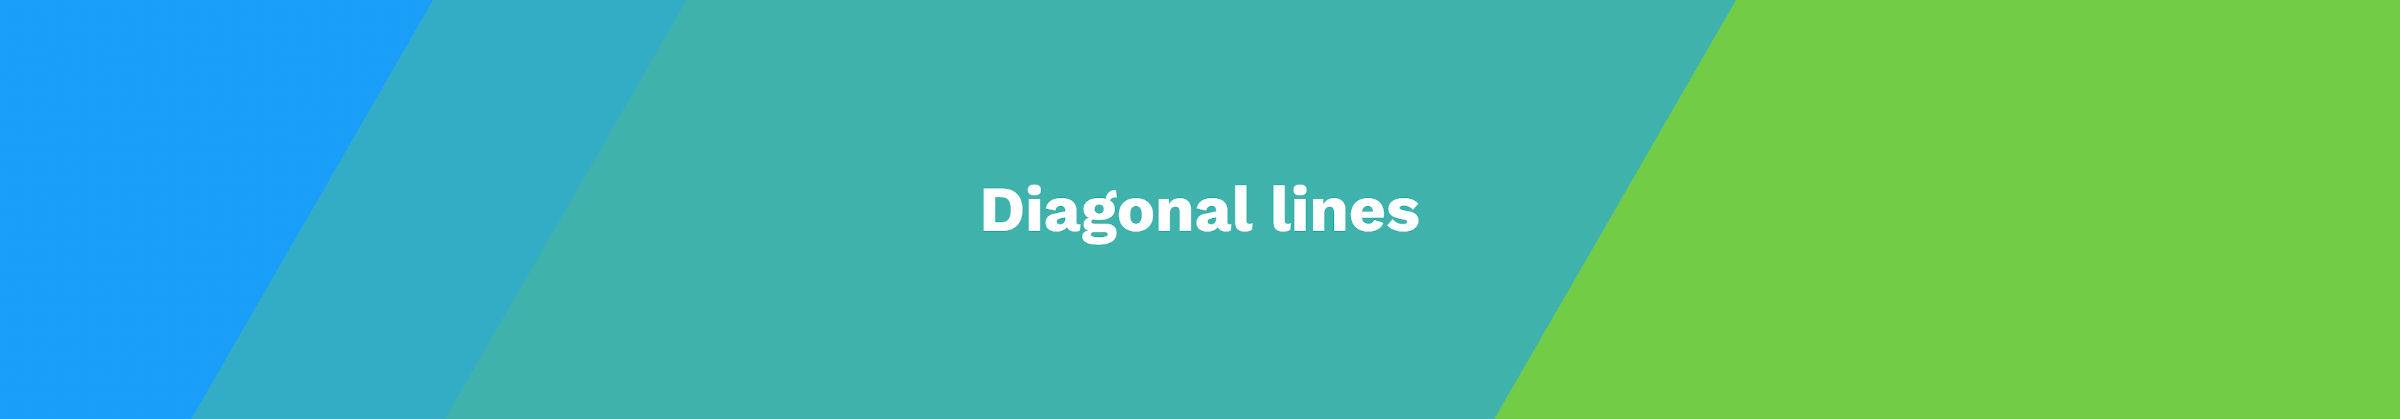 animated diag lines